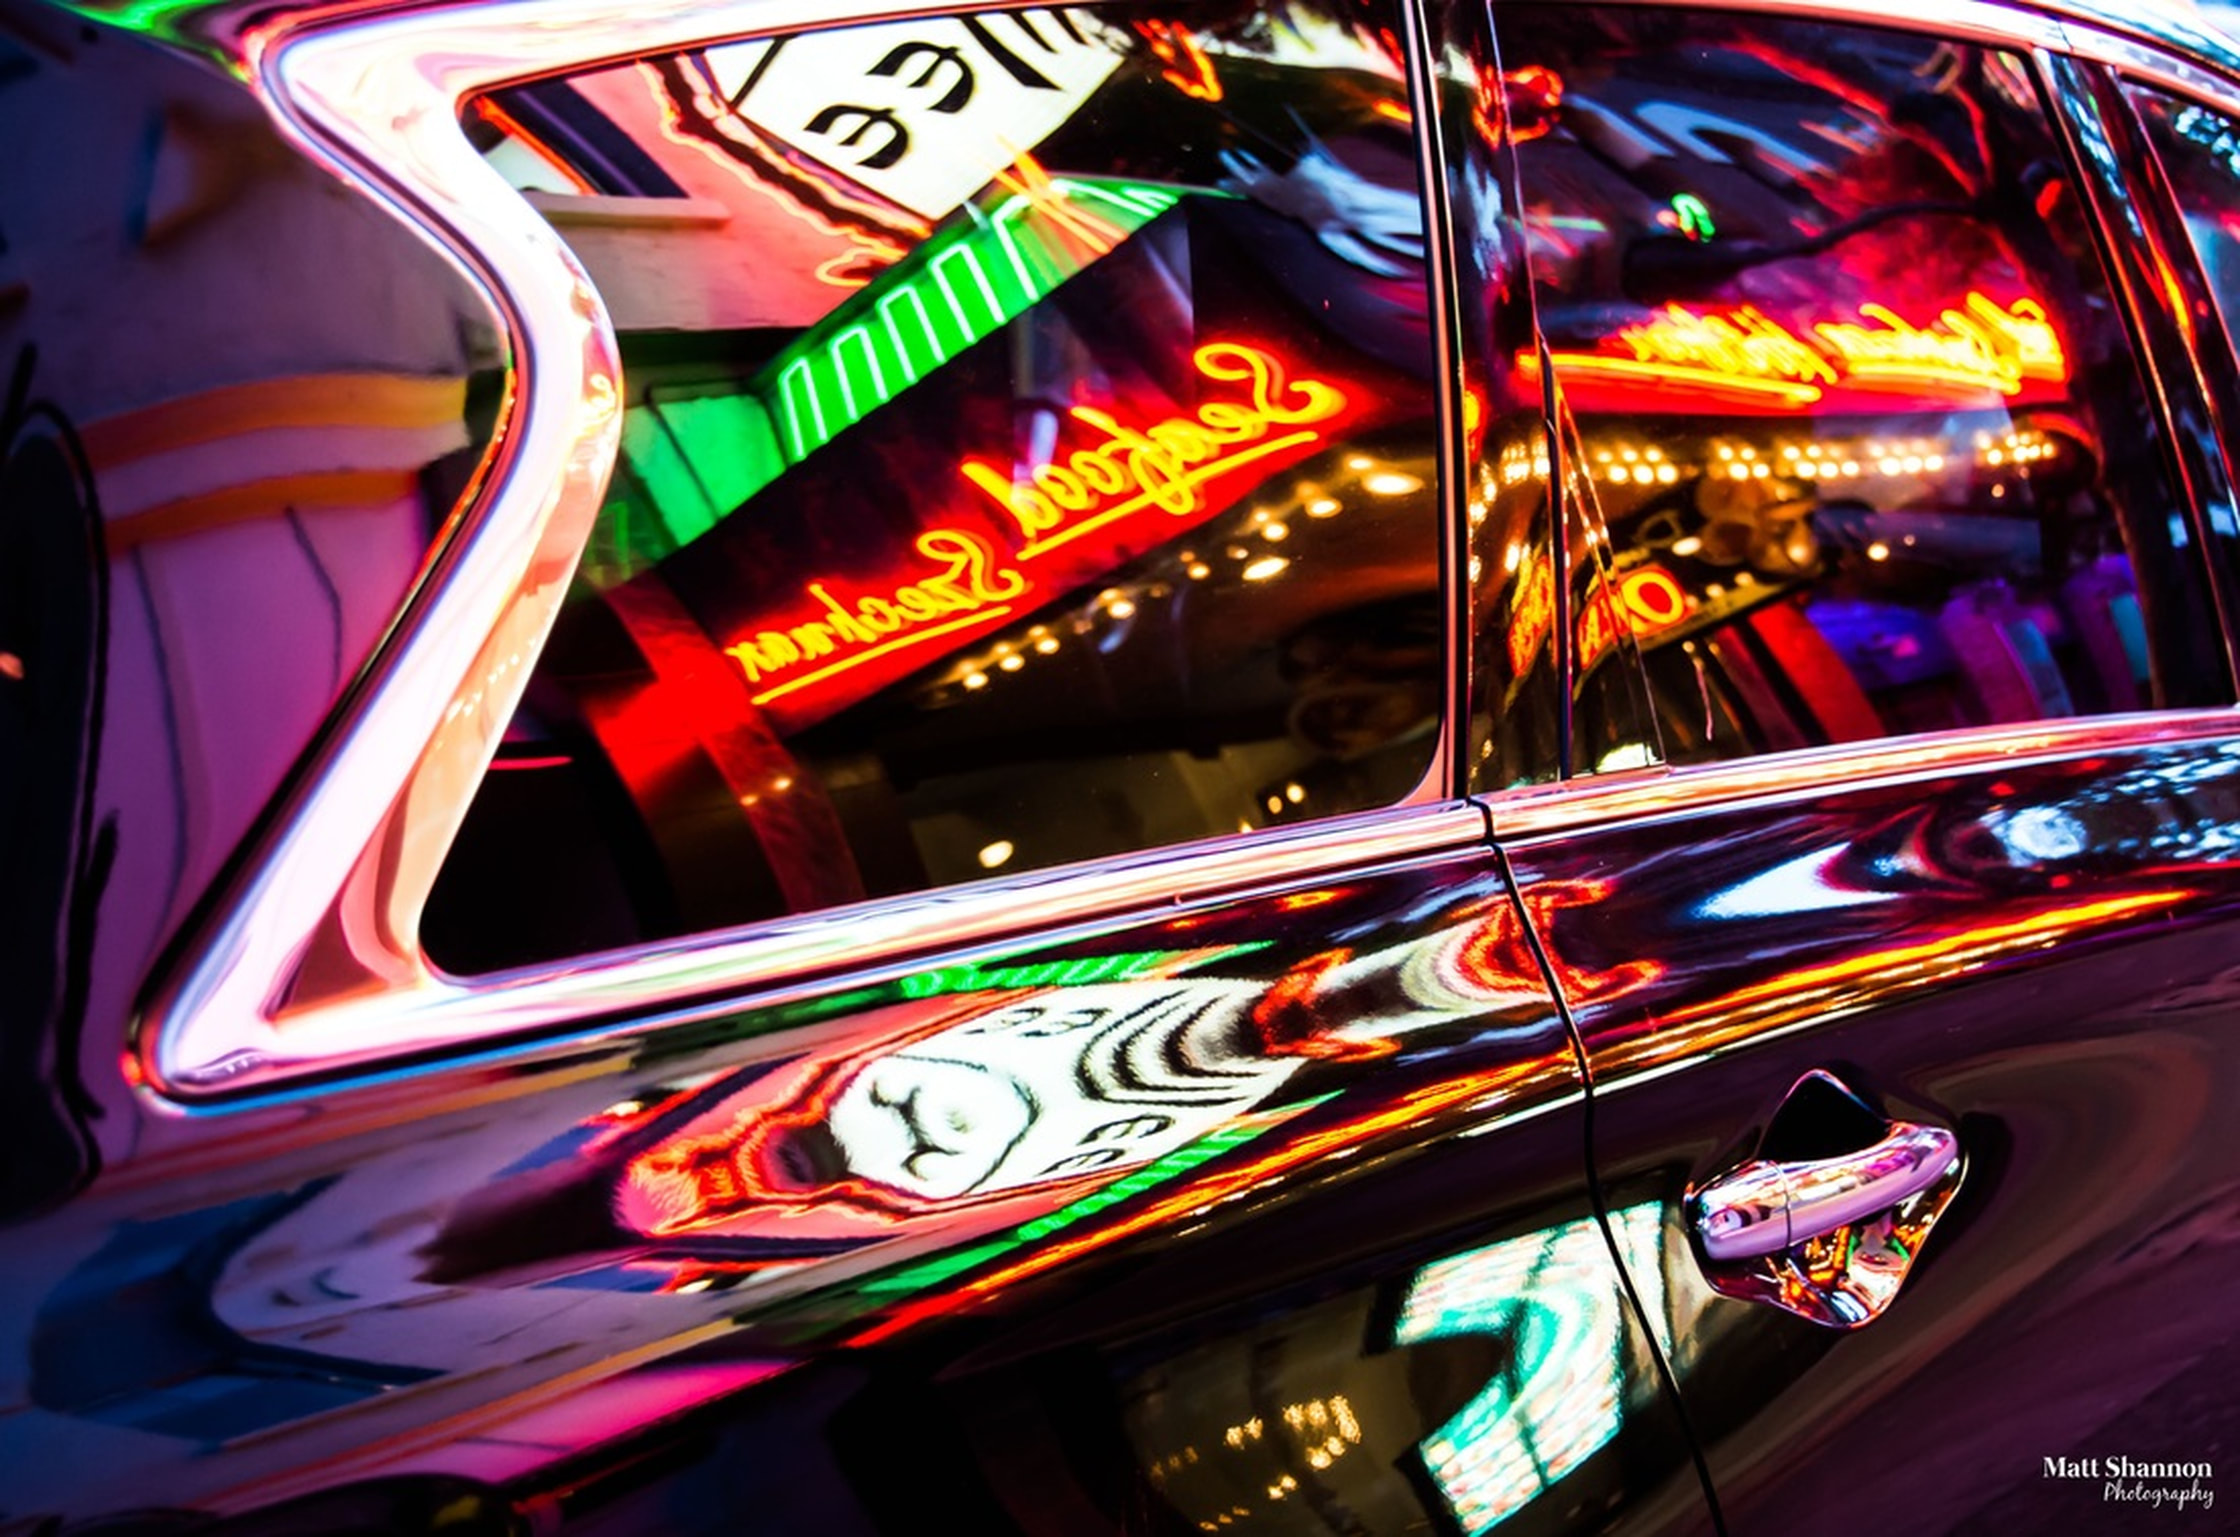 Victoria, china town, matt shannon photography, reflection, car, colors, beautiful colors, neon lights, exploring victoria, night photography, Picture